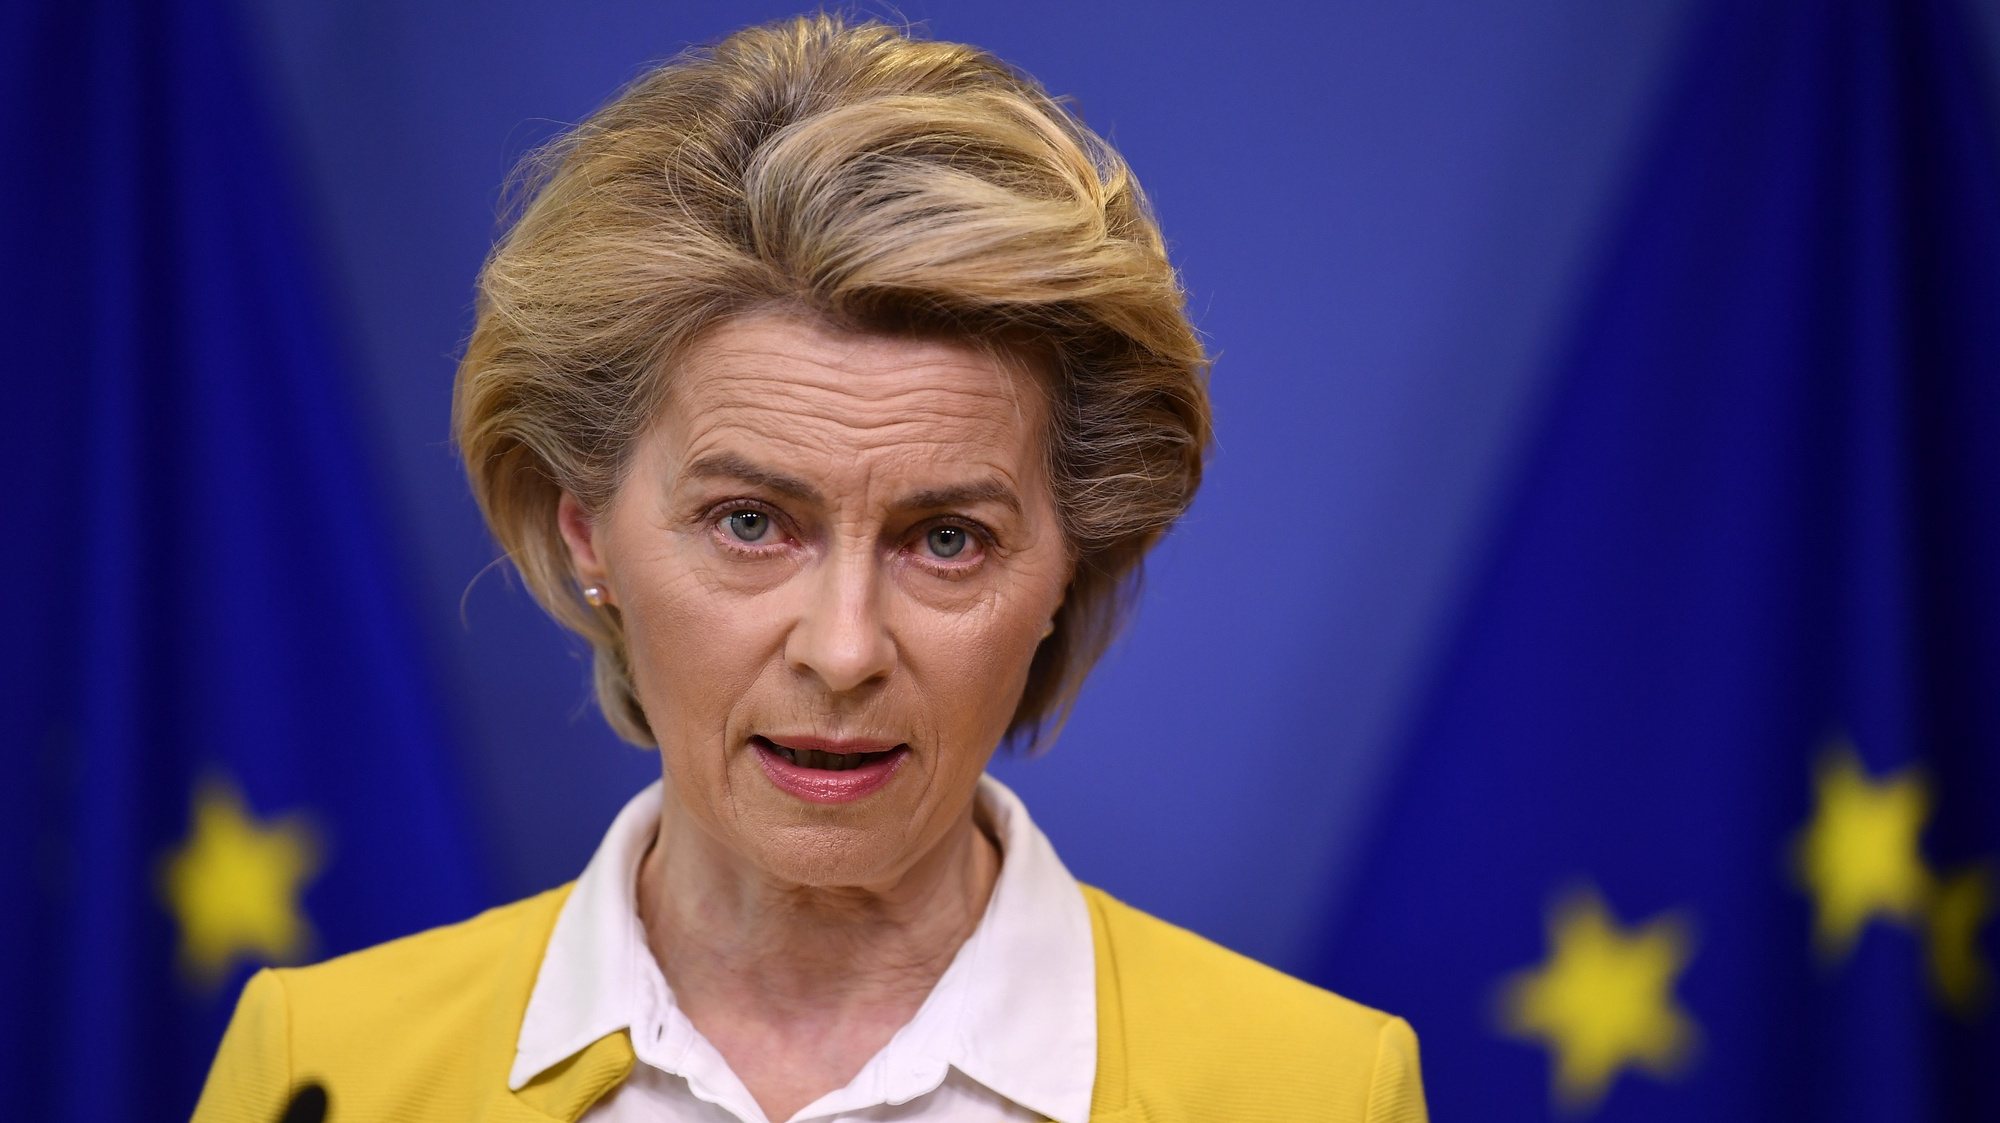 epa09134959 European Commission President Ursula von der Leyen delivers a statement after a college meeting at the EU headquarters in Brussels, Belgium, 14 April 2021.  EPA/JOHN THYS / POOL